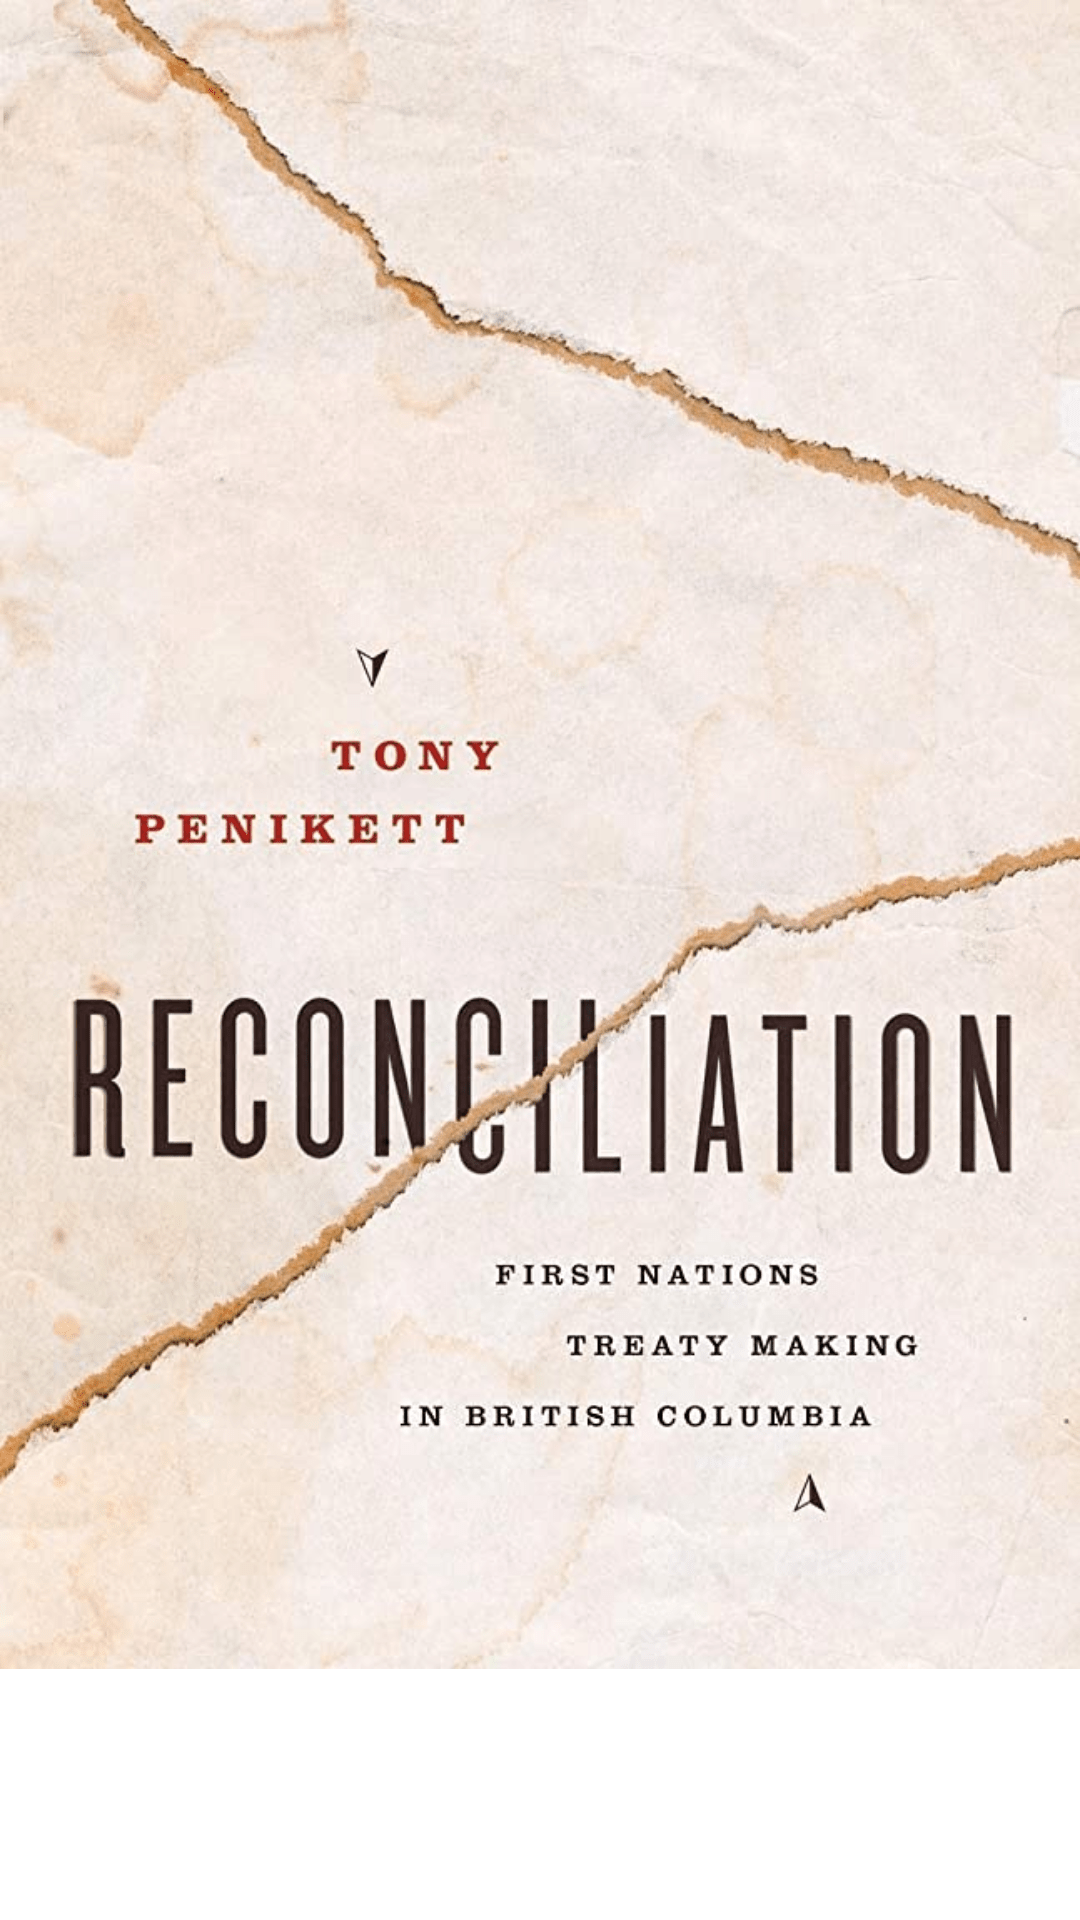 Reconciliation: First Nations Treaty Making in British Columbia